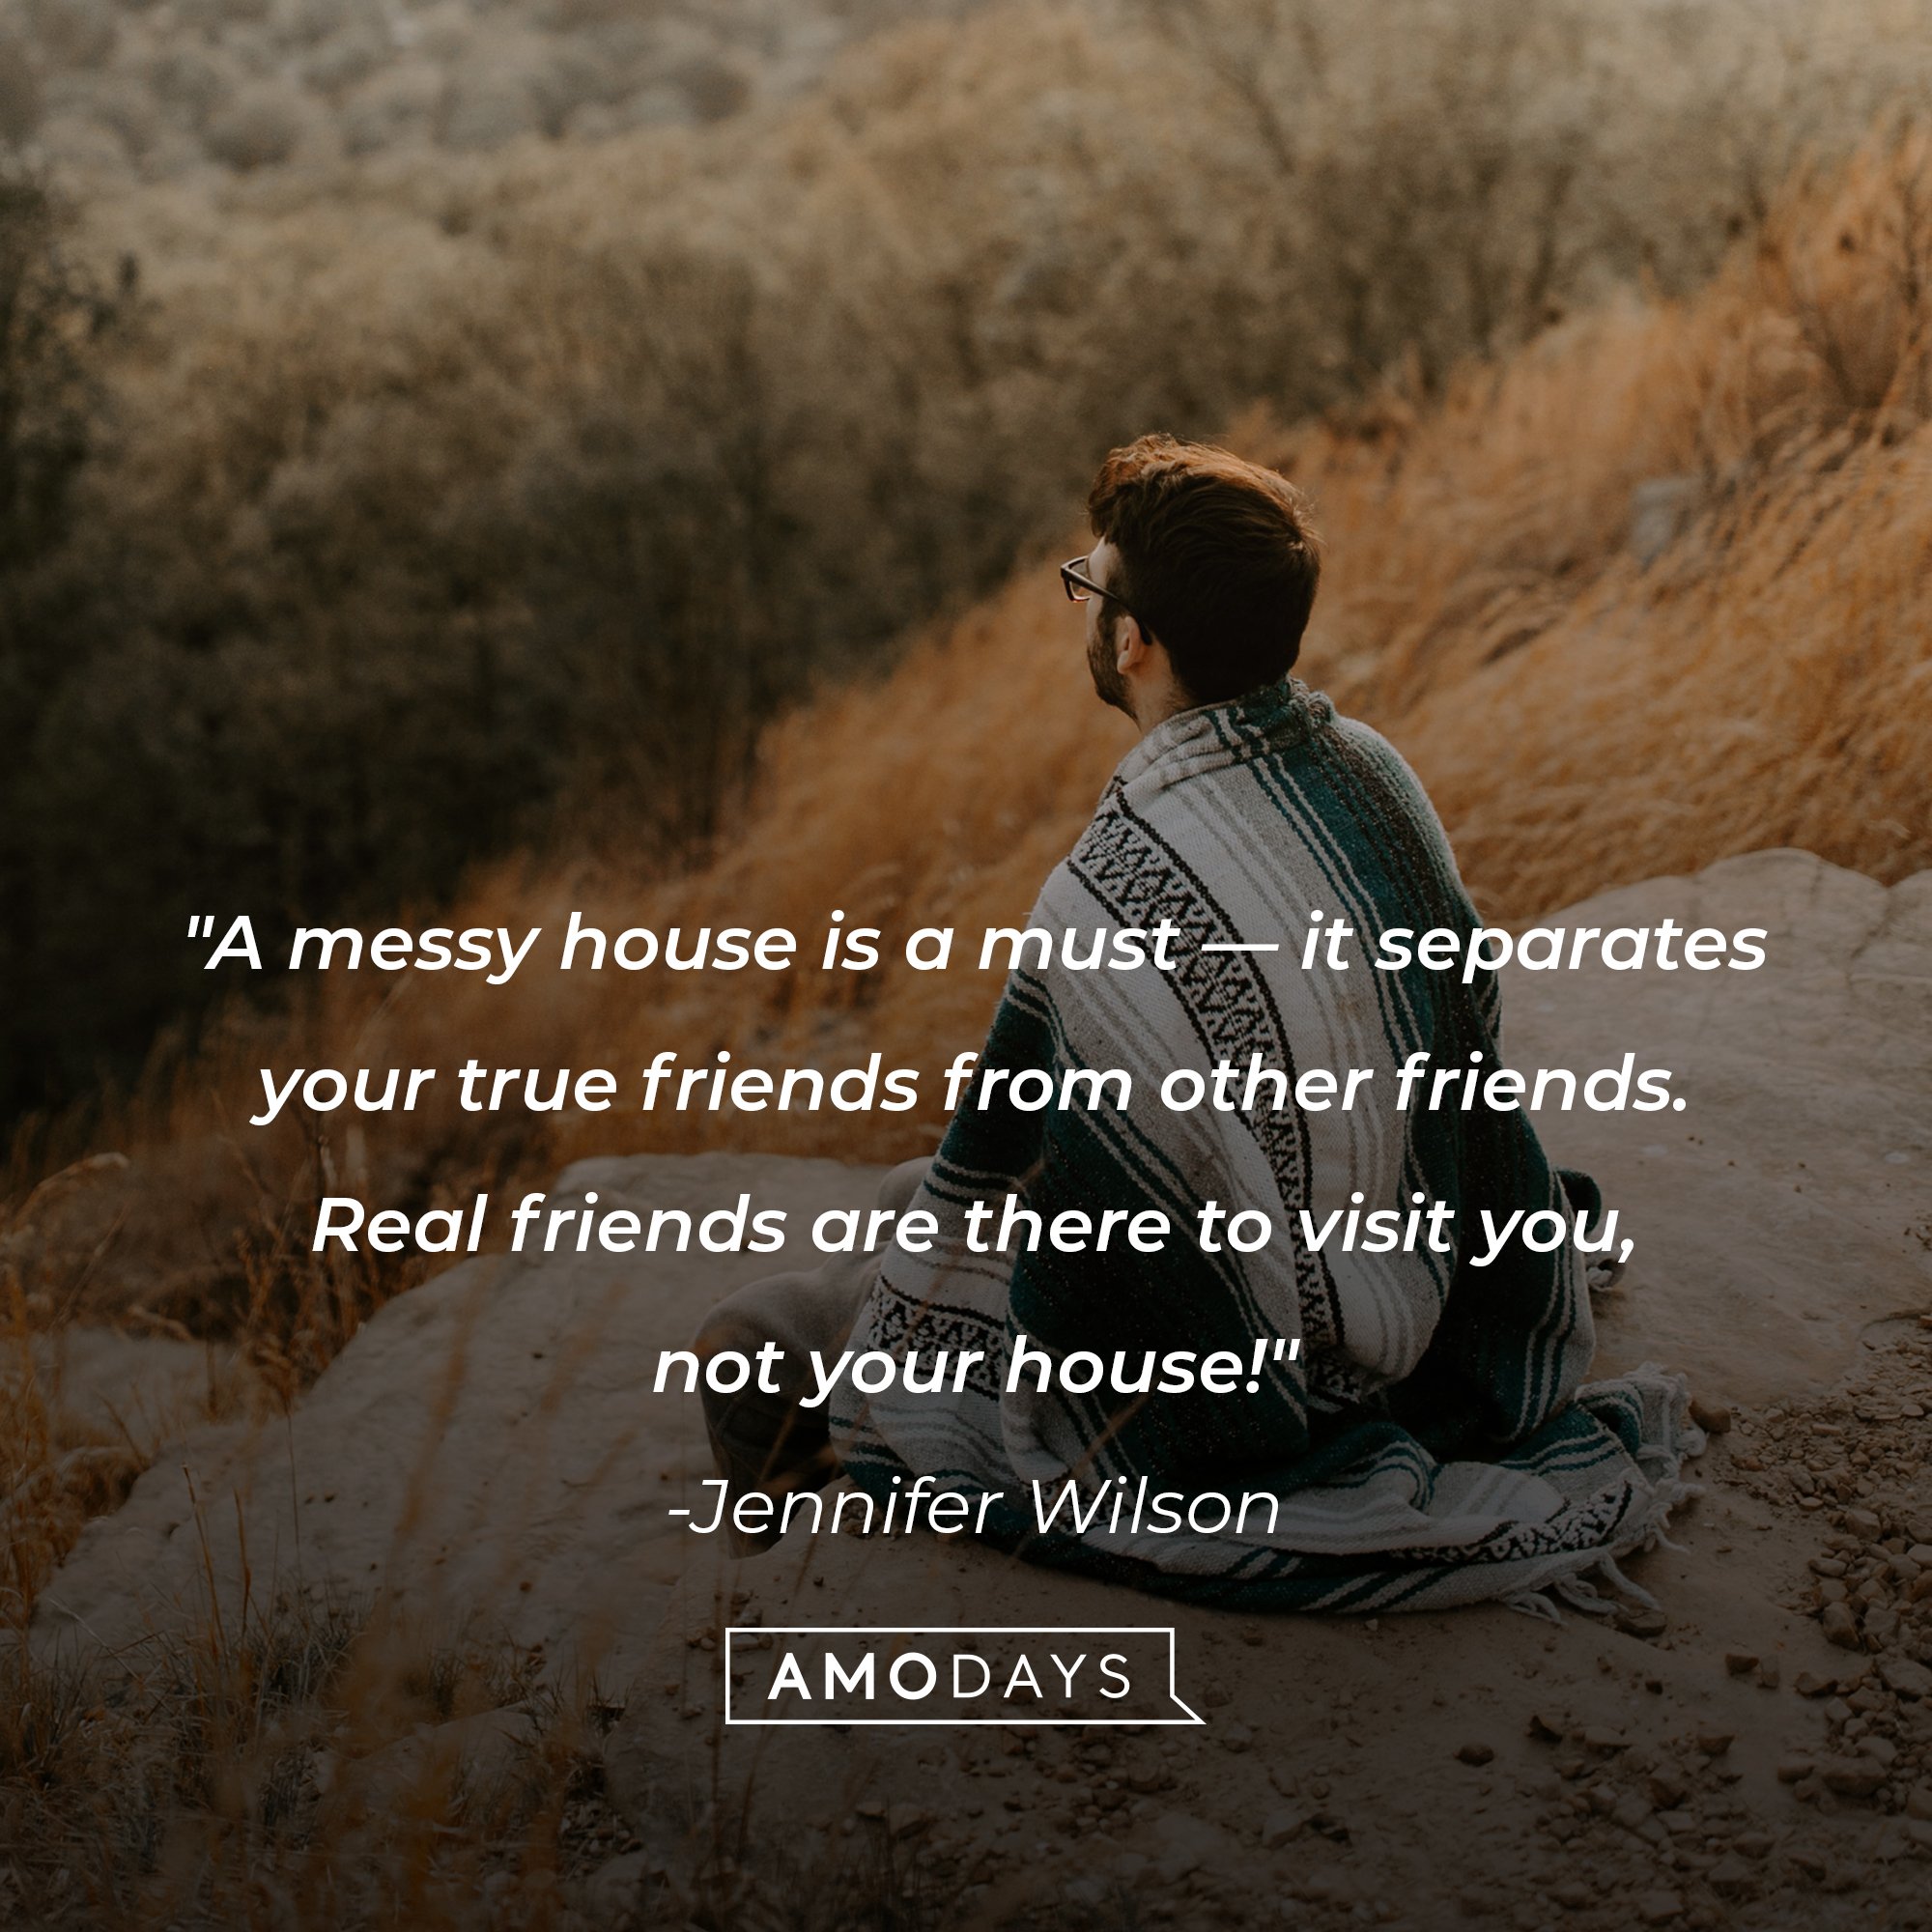 Jennifer Wilson’s quote: "A messy house is a must—it separates your true friends from other friends. Real friends are there to visit you, not your house!" | Image: AmoDays 